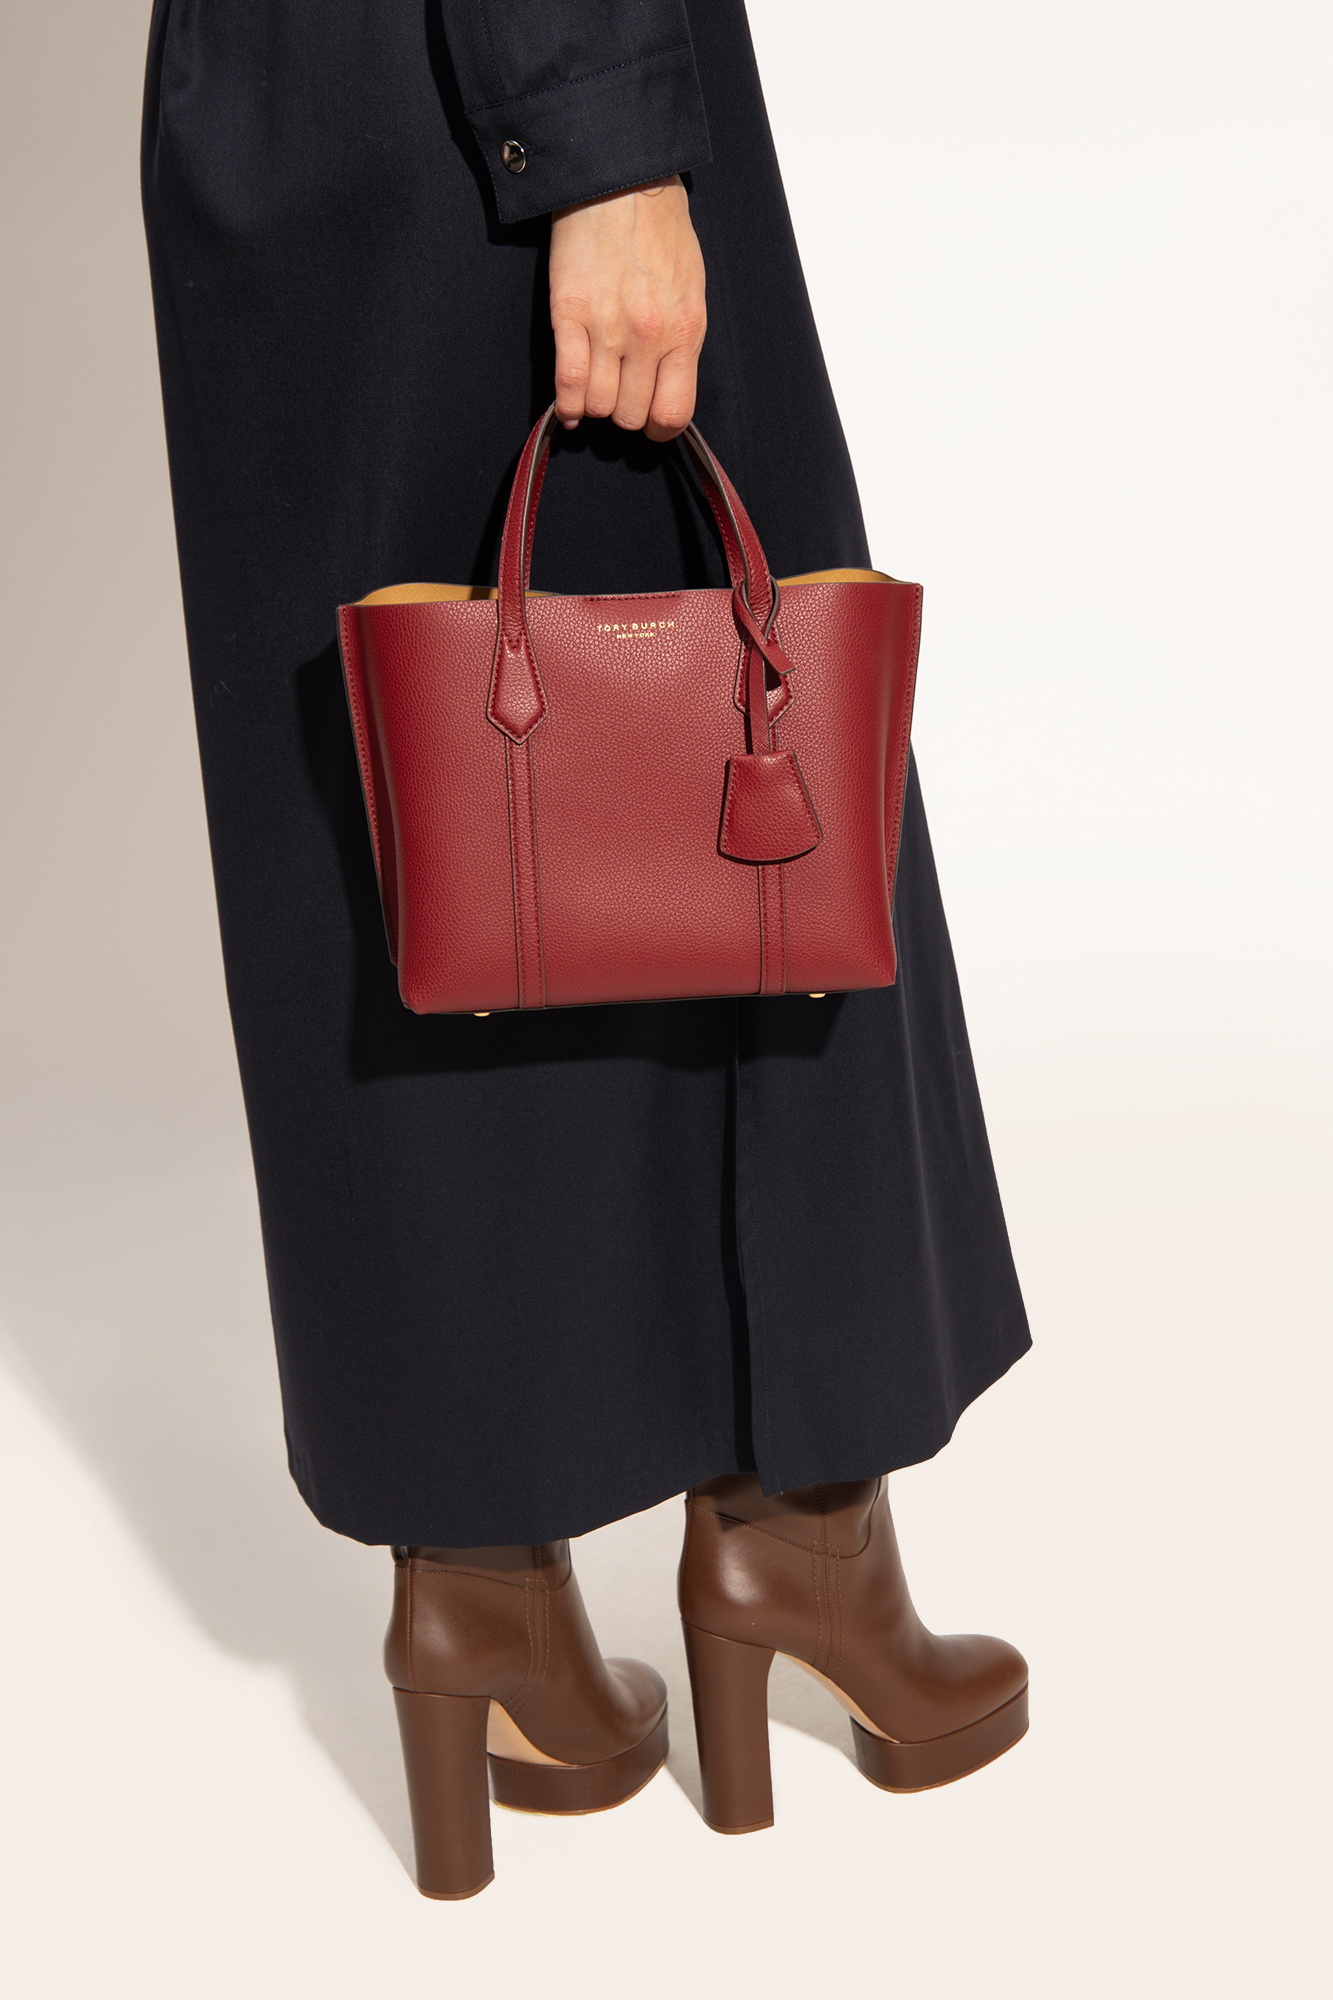 Tory Burch Perry Small Leahter Tote Bag